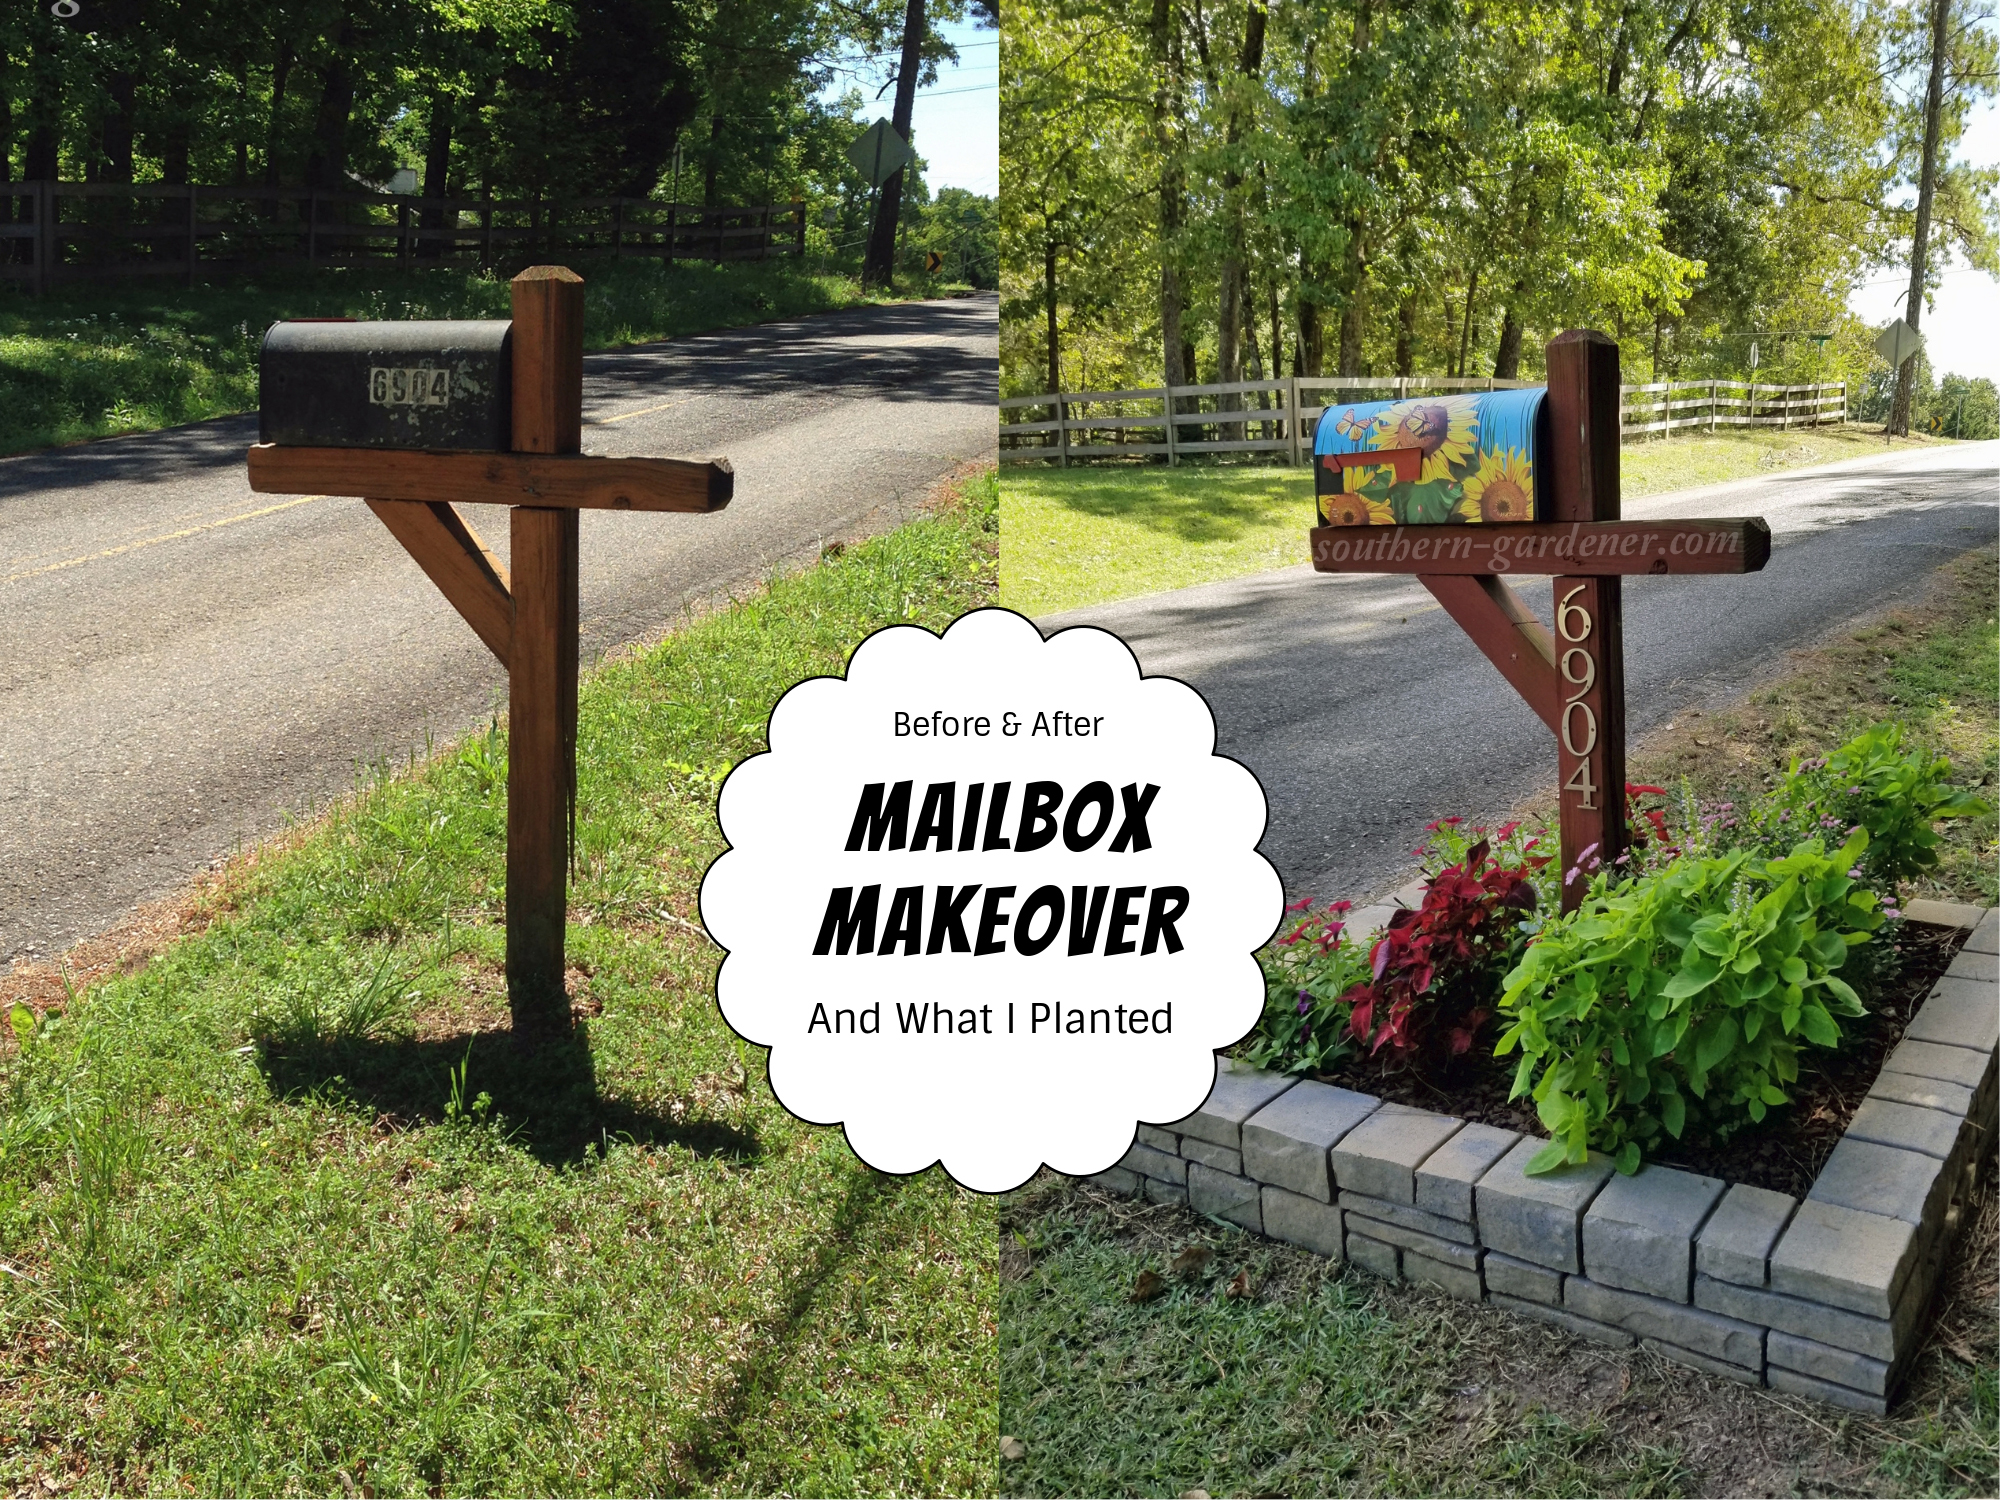 Mailbox Landscaping Makeover, Landscaping Around Mailbox